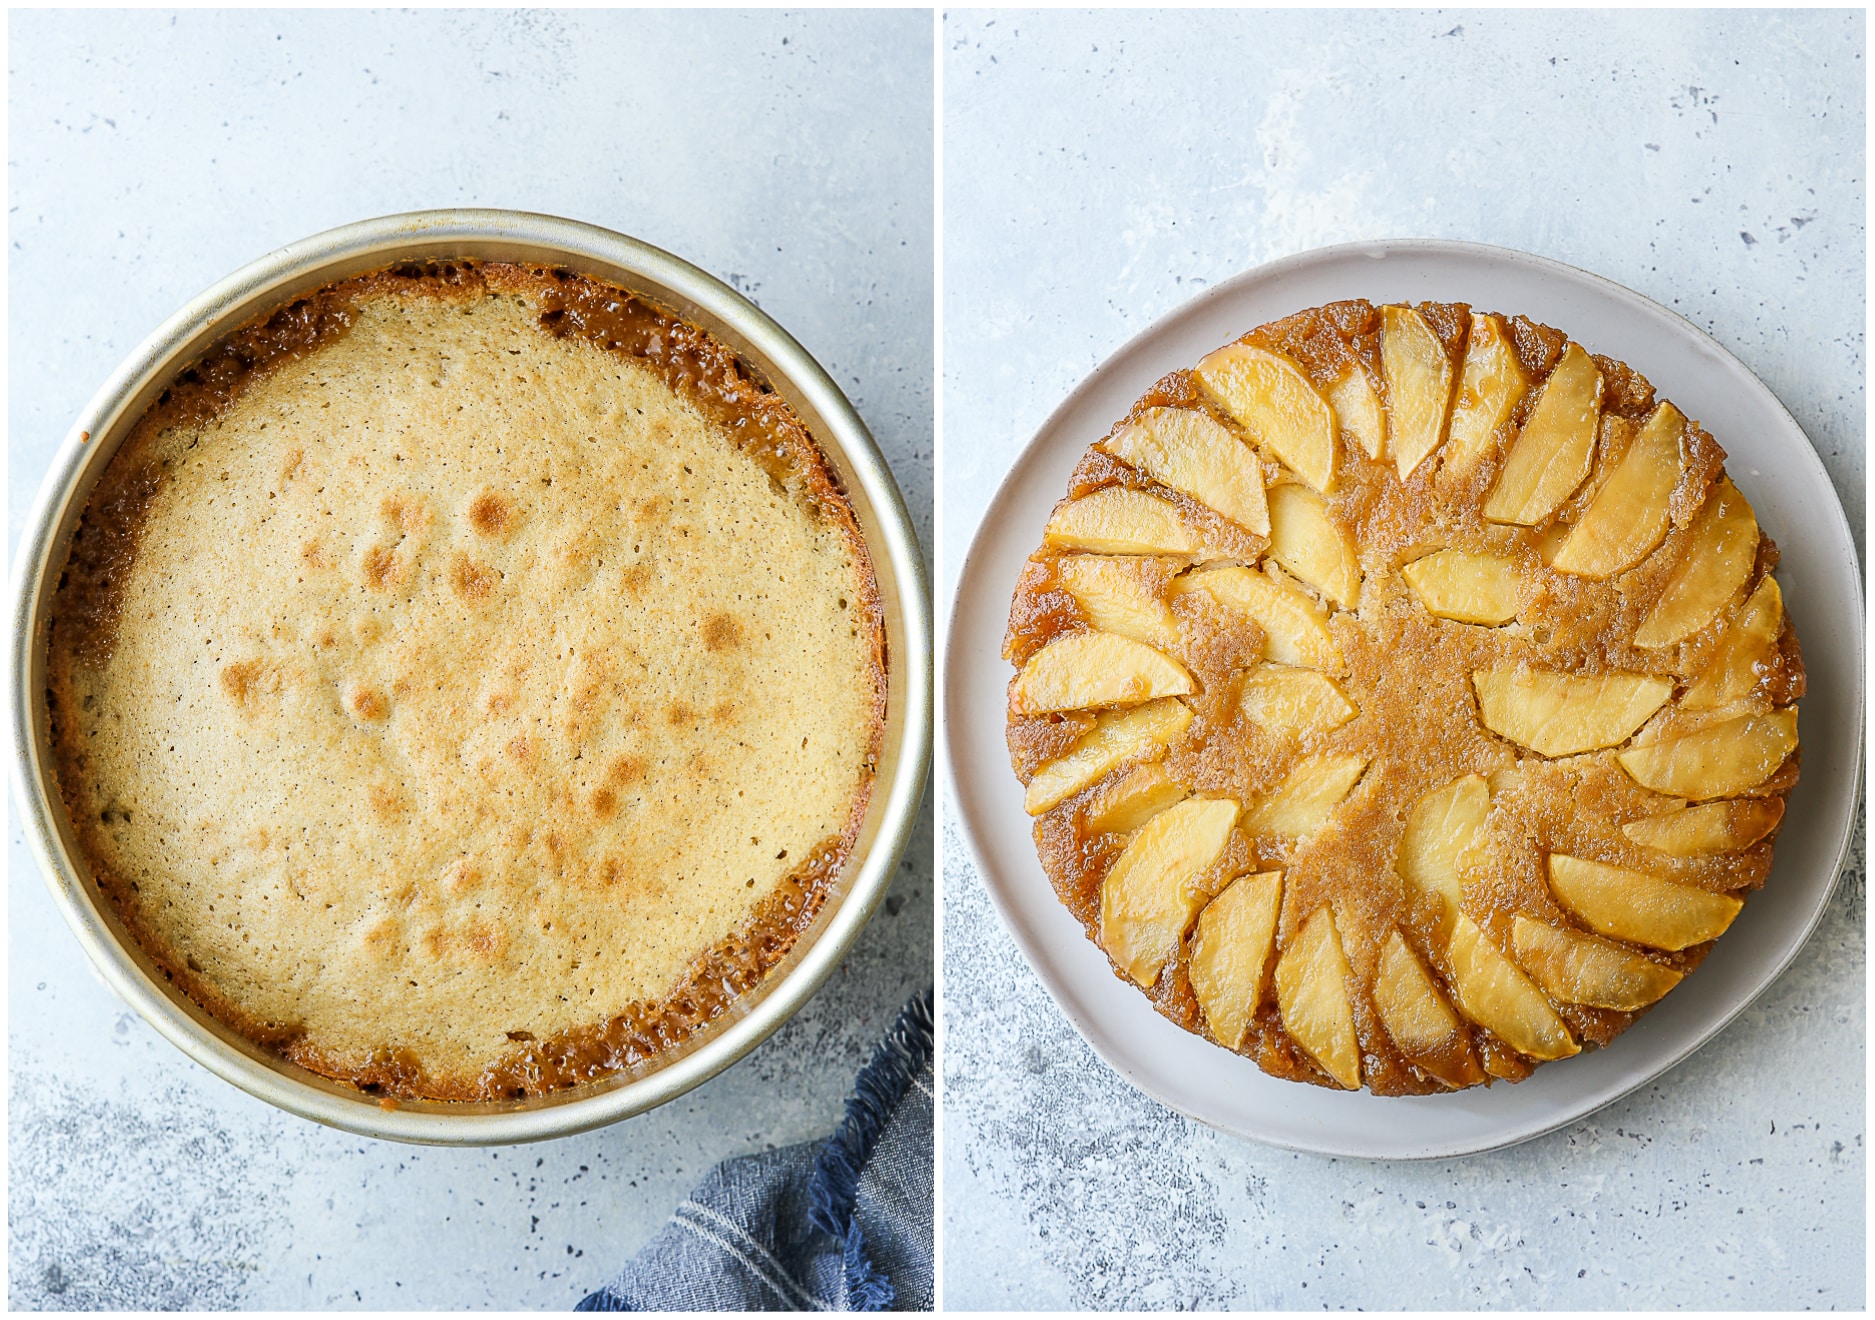 baked caramel apple cake before and after flipping it upside down